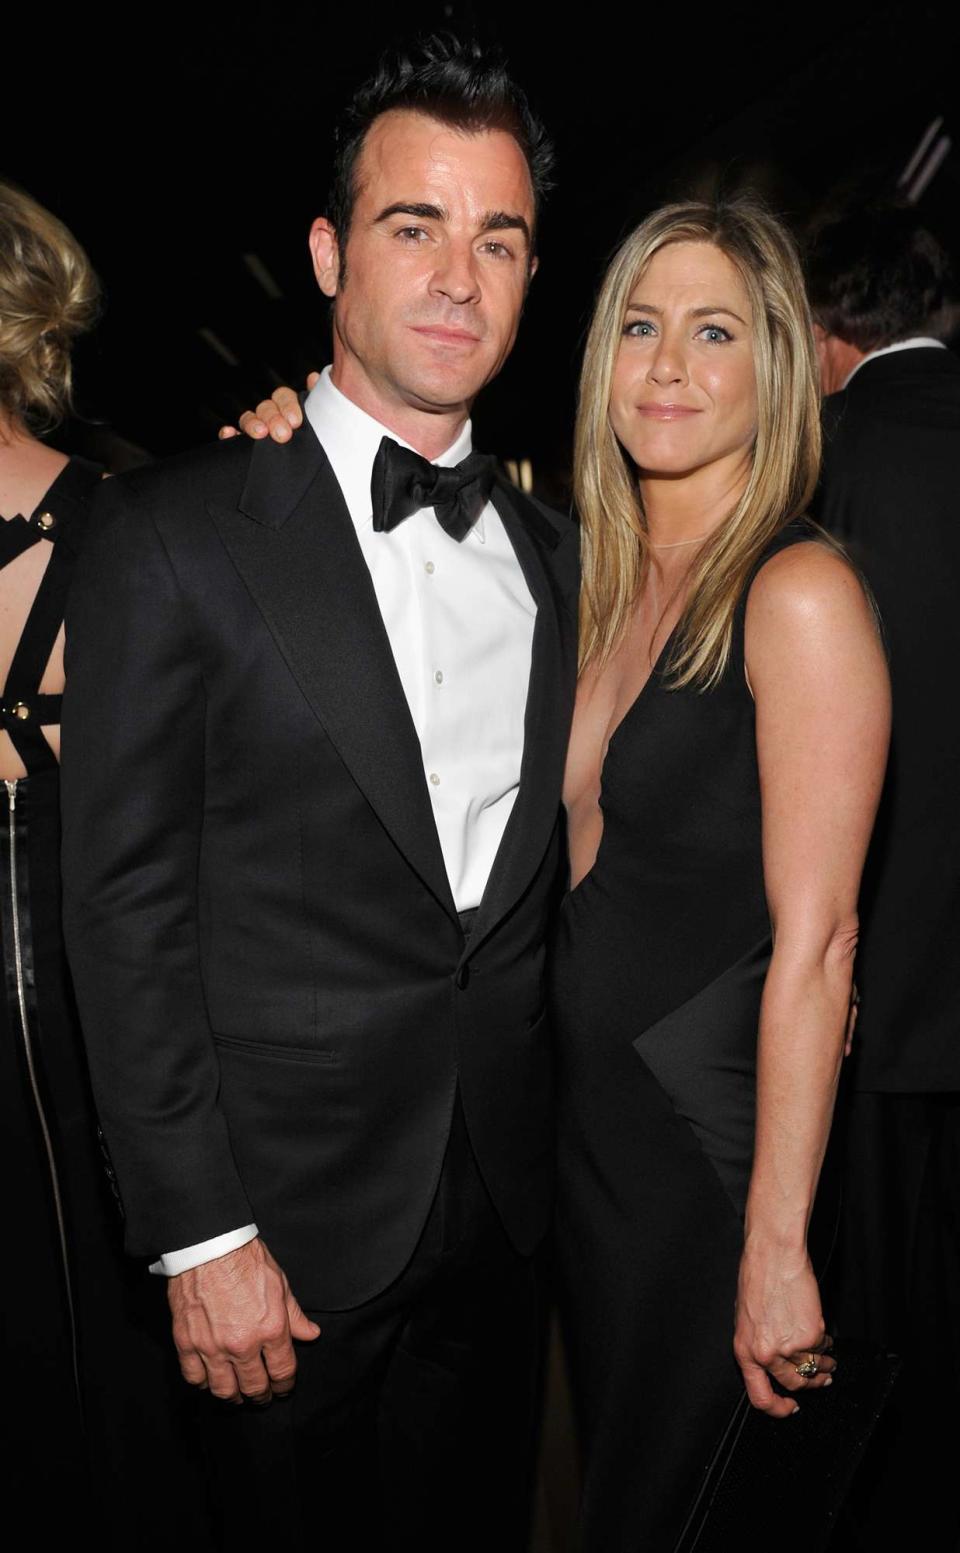 Justin Theroux and Jennifer Aniston attend LACMA 2012 Art + Film Gala Honoring Ed Ruscha and Stanley Kubrick presented by Gucci at LACMA on October 27, 2012 in Los Angeles, California